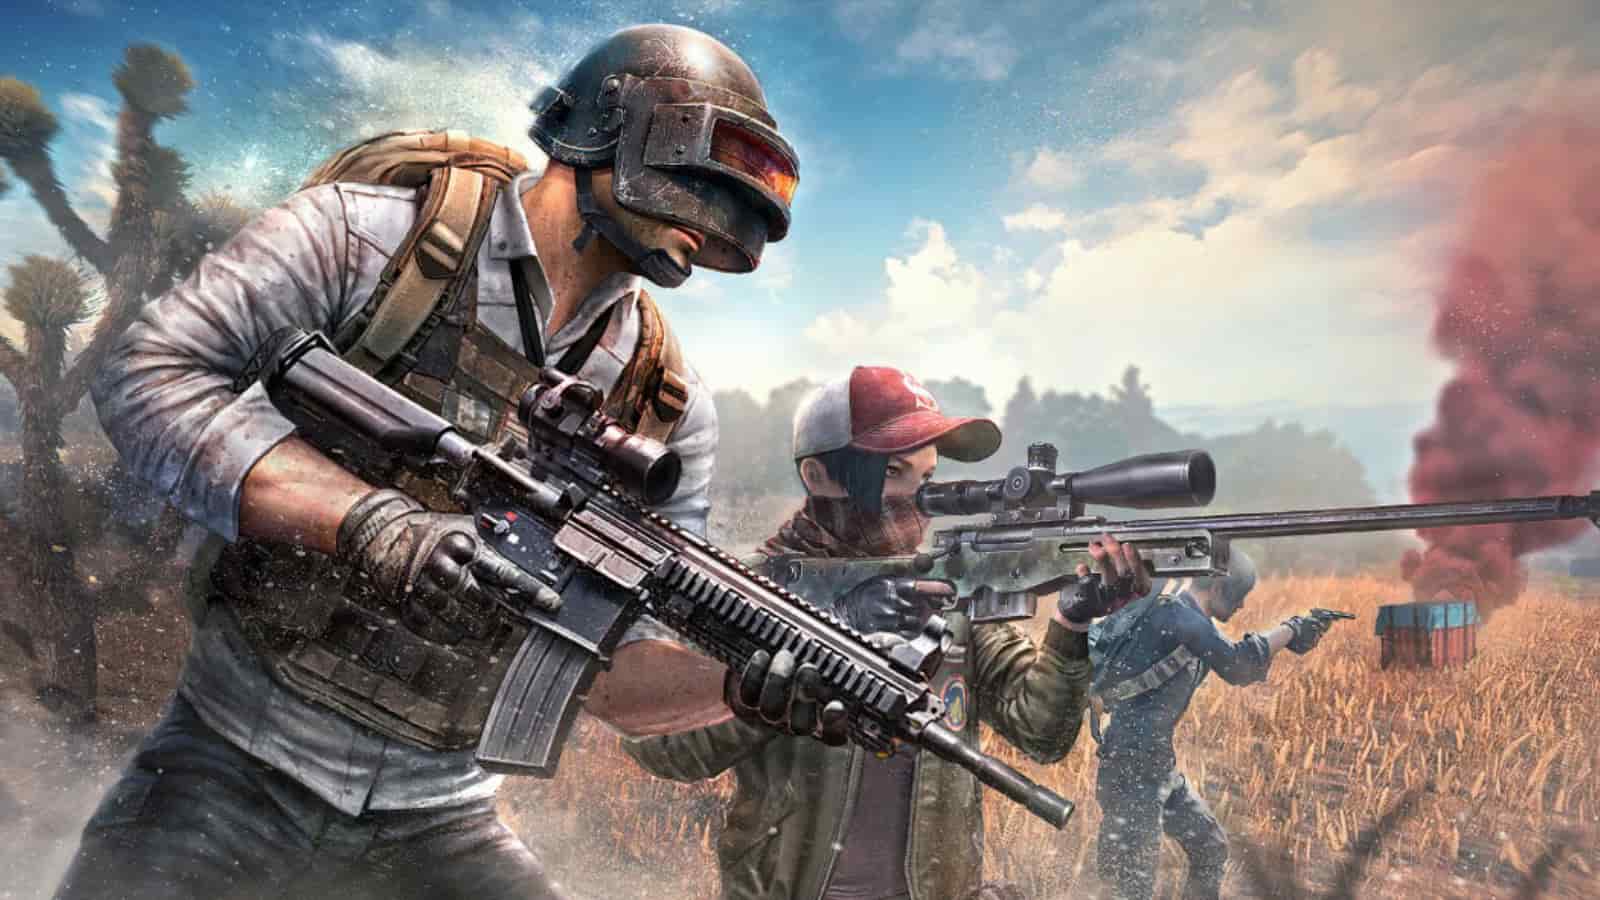 Battlegrounds mobile india best weapon skins to obtain without uc in bgmi